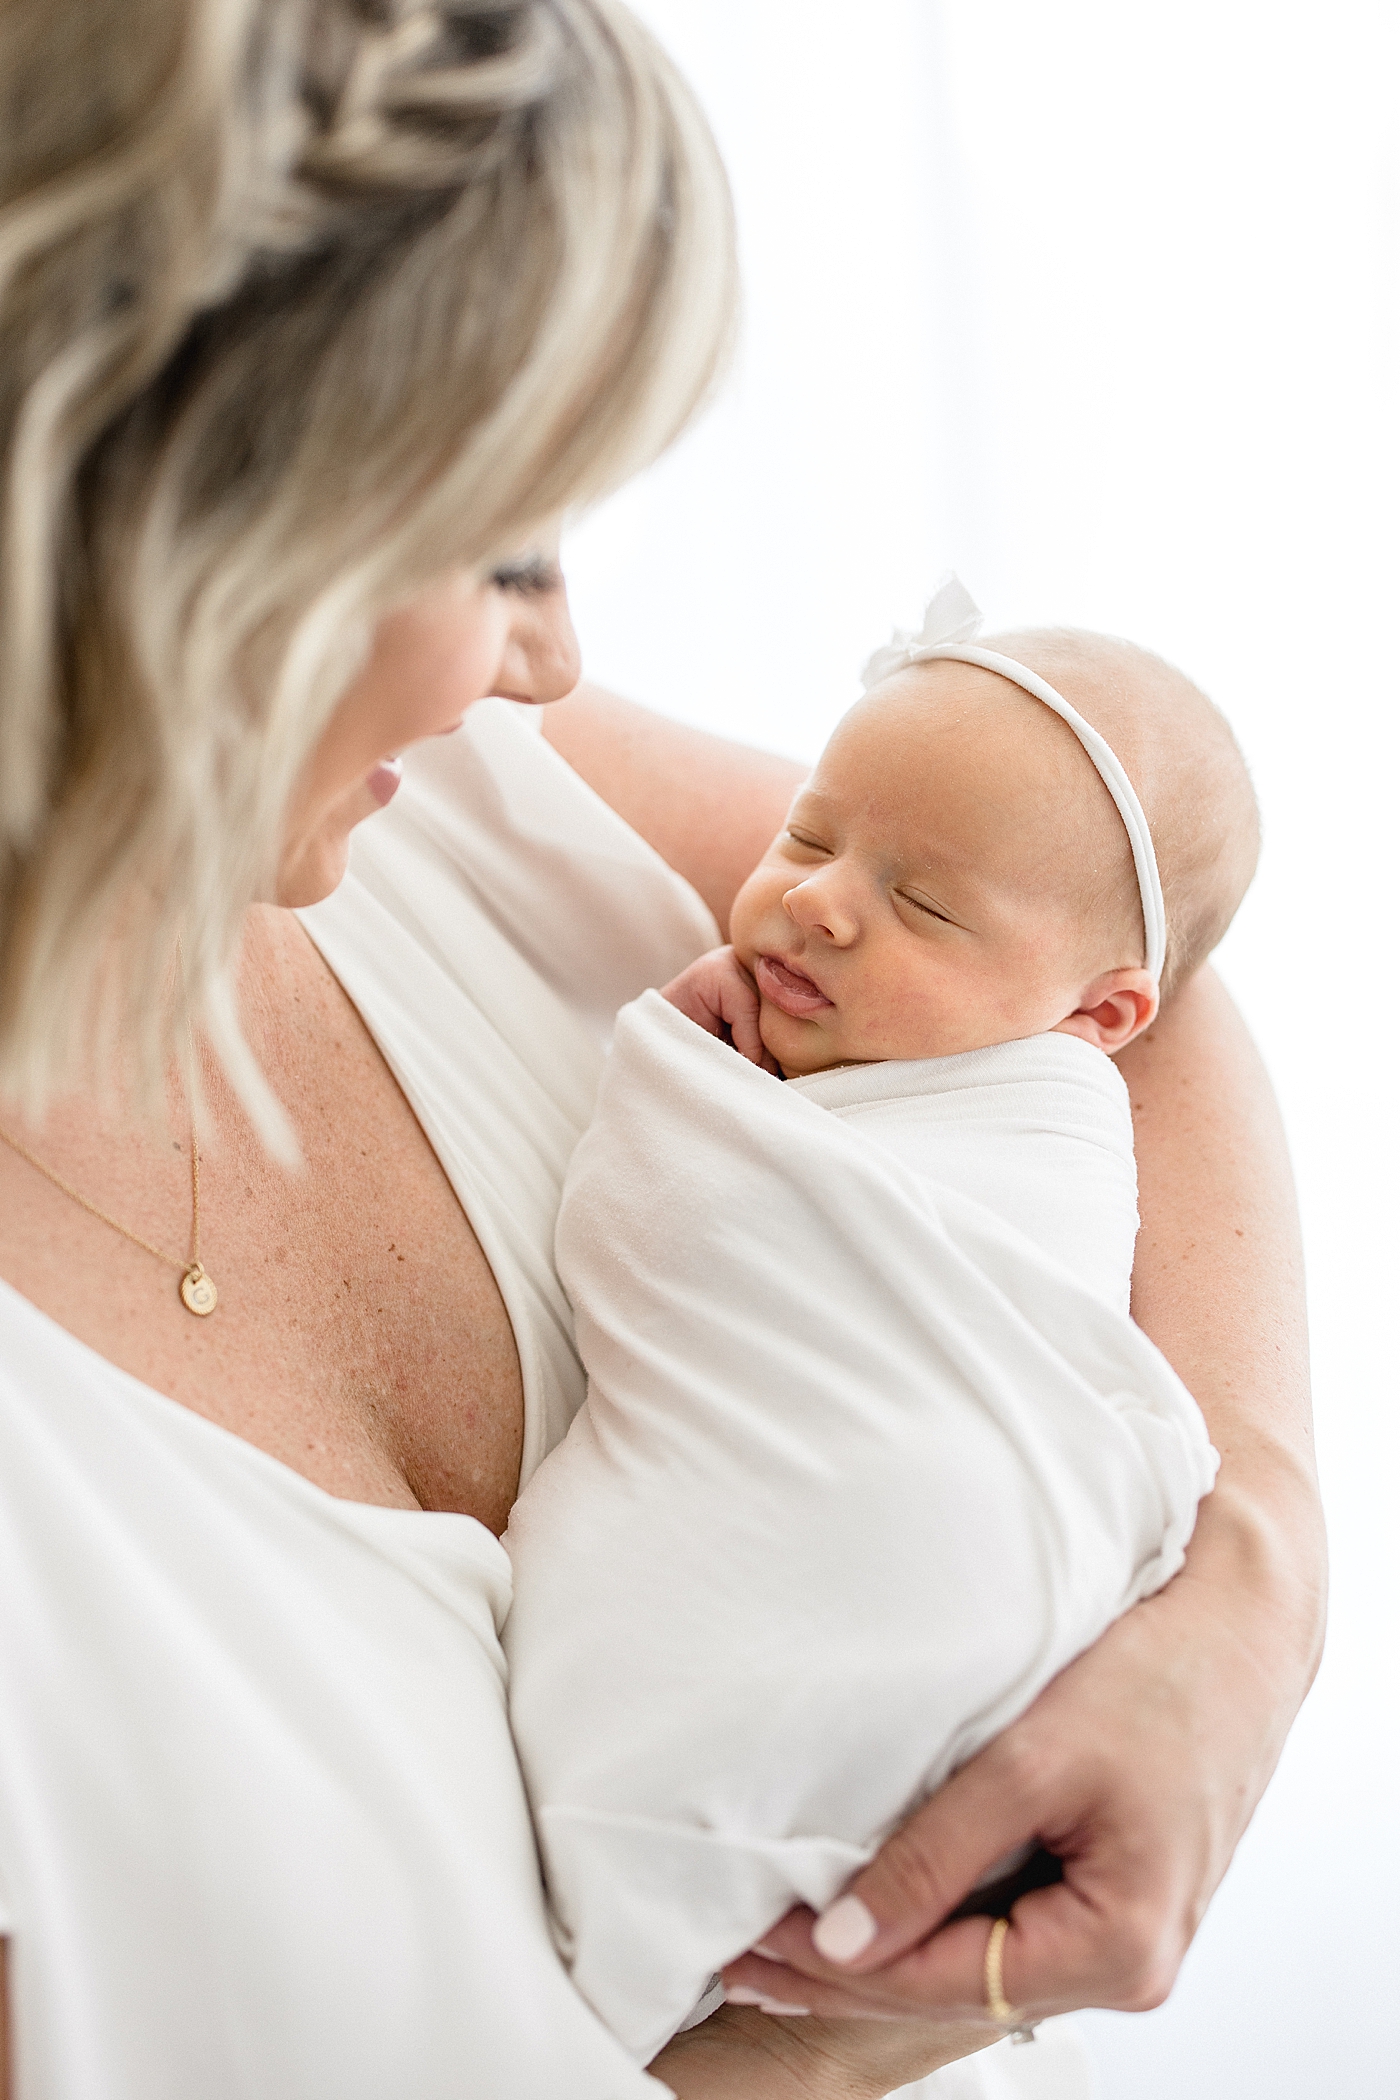 Mom looking down at her daughter during baby girl's studio newborn session. Photo by Brittany Elise Photography.